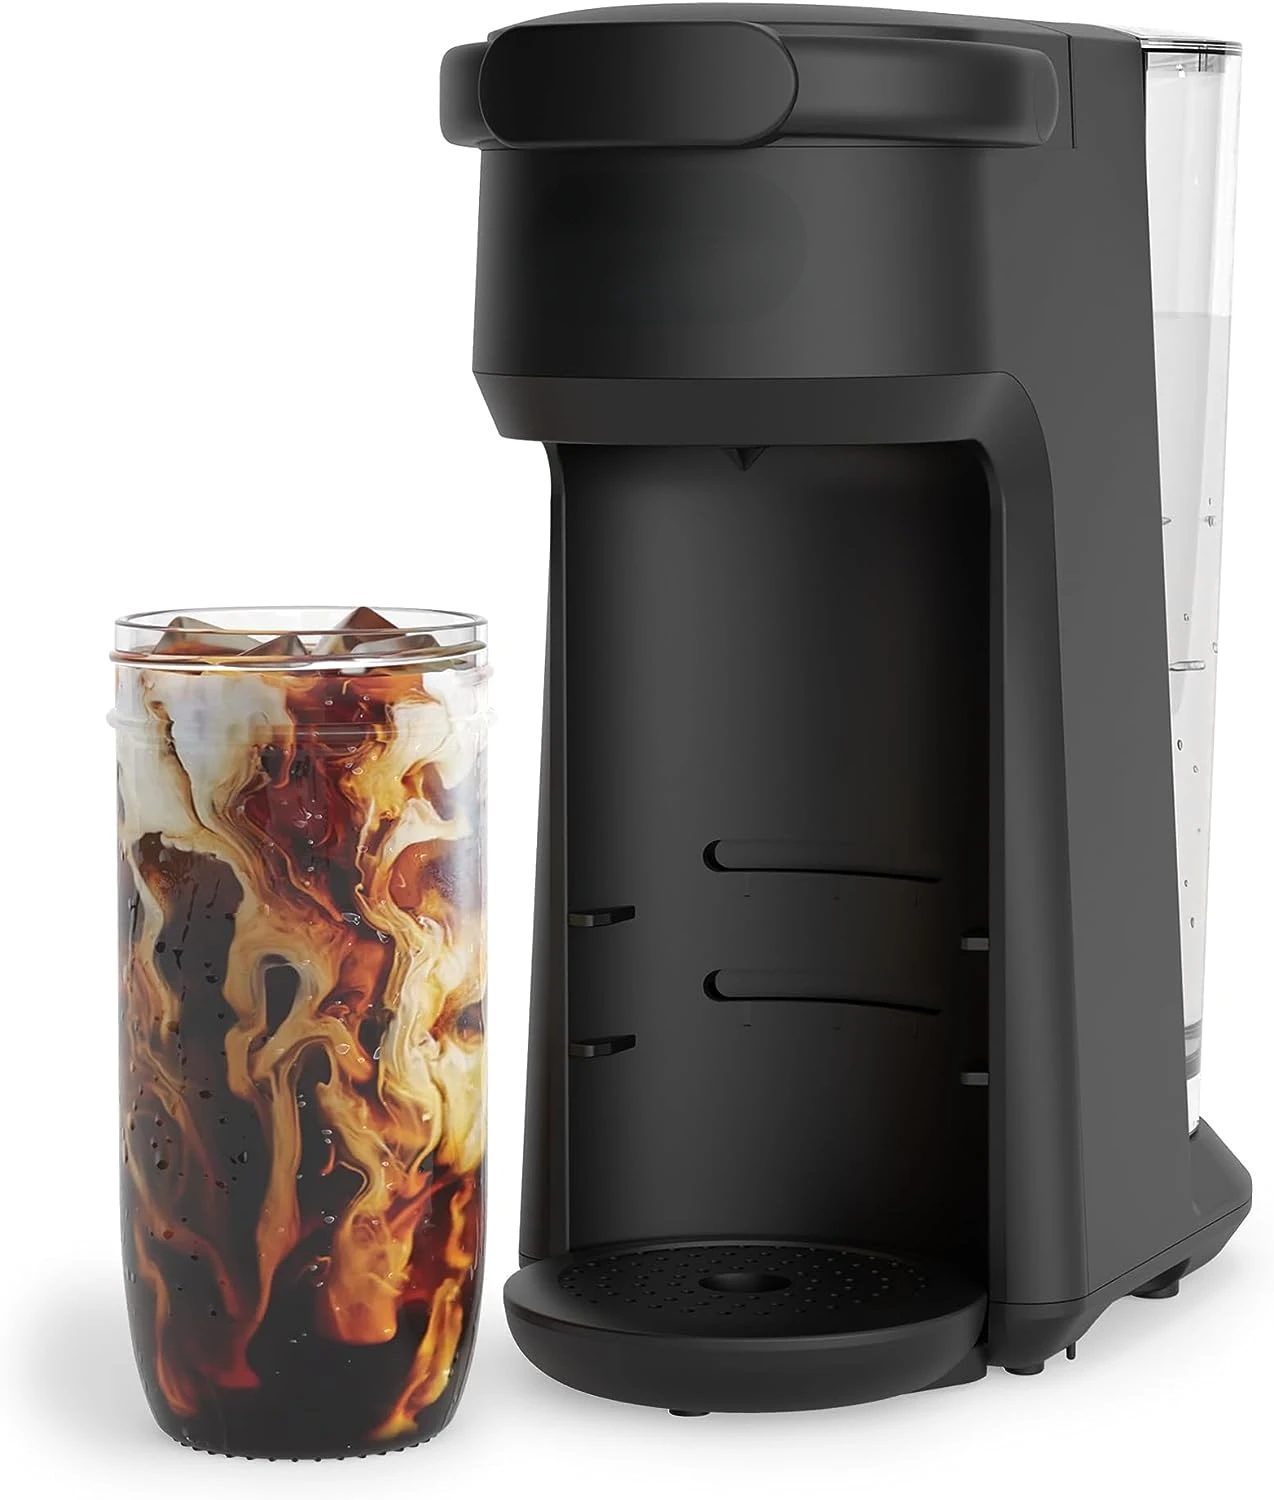 

\u2013 The Ultimate Iced Coffee Maker, Make delicious and flavorful iced coffee at home in less than 2 minutes from the comfort